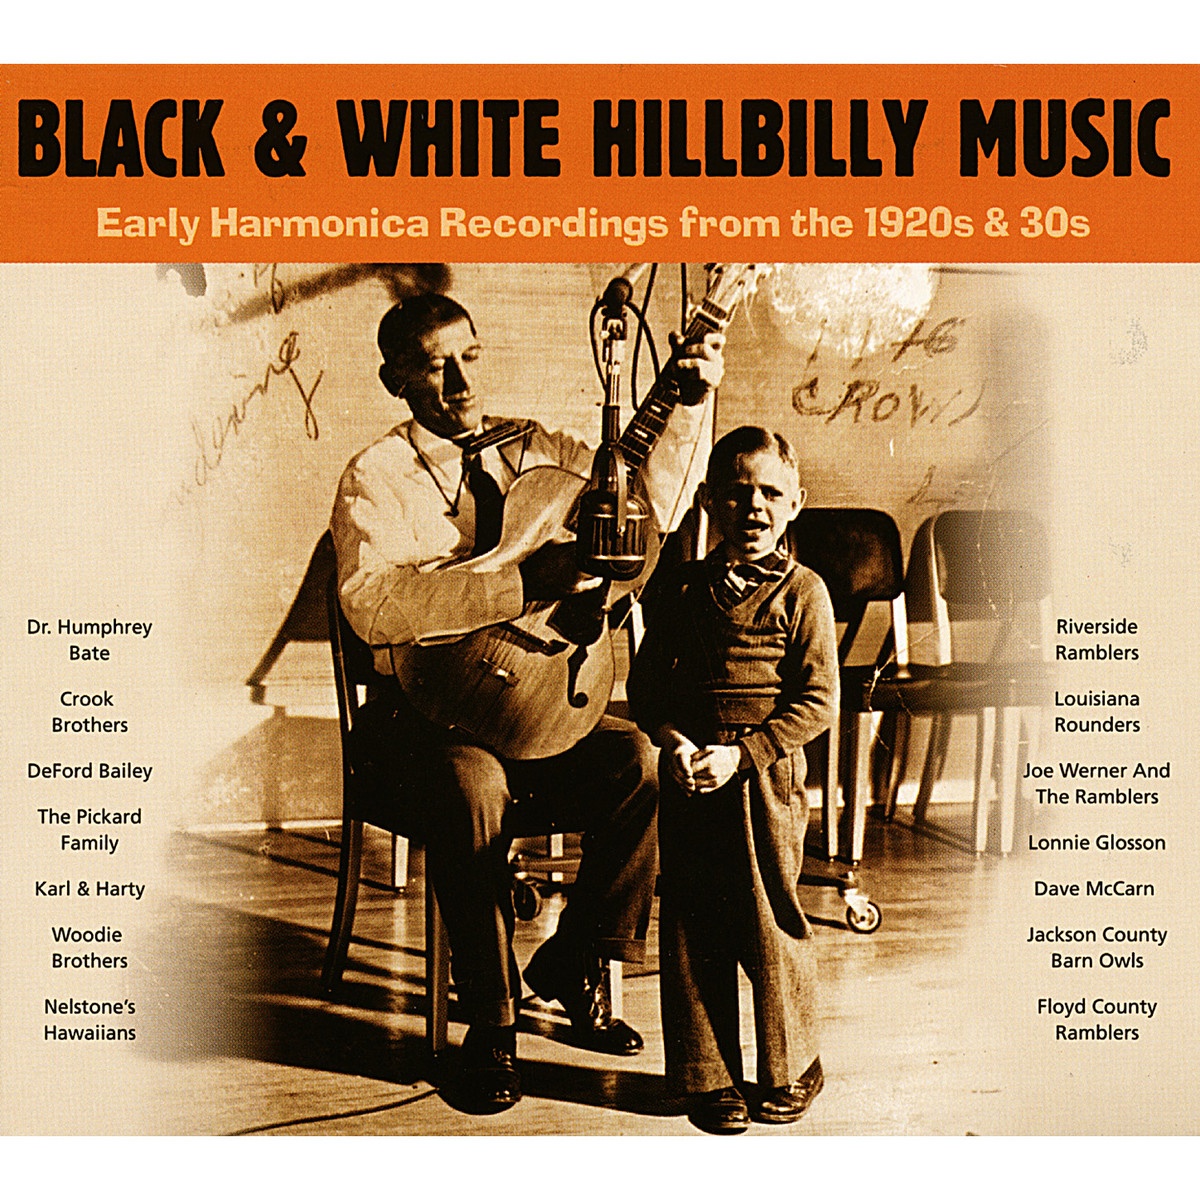 Black & White Hillbilly Music - Early Harmonica Recordings from the 1920s & 30s